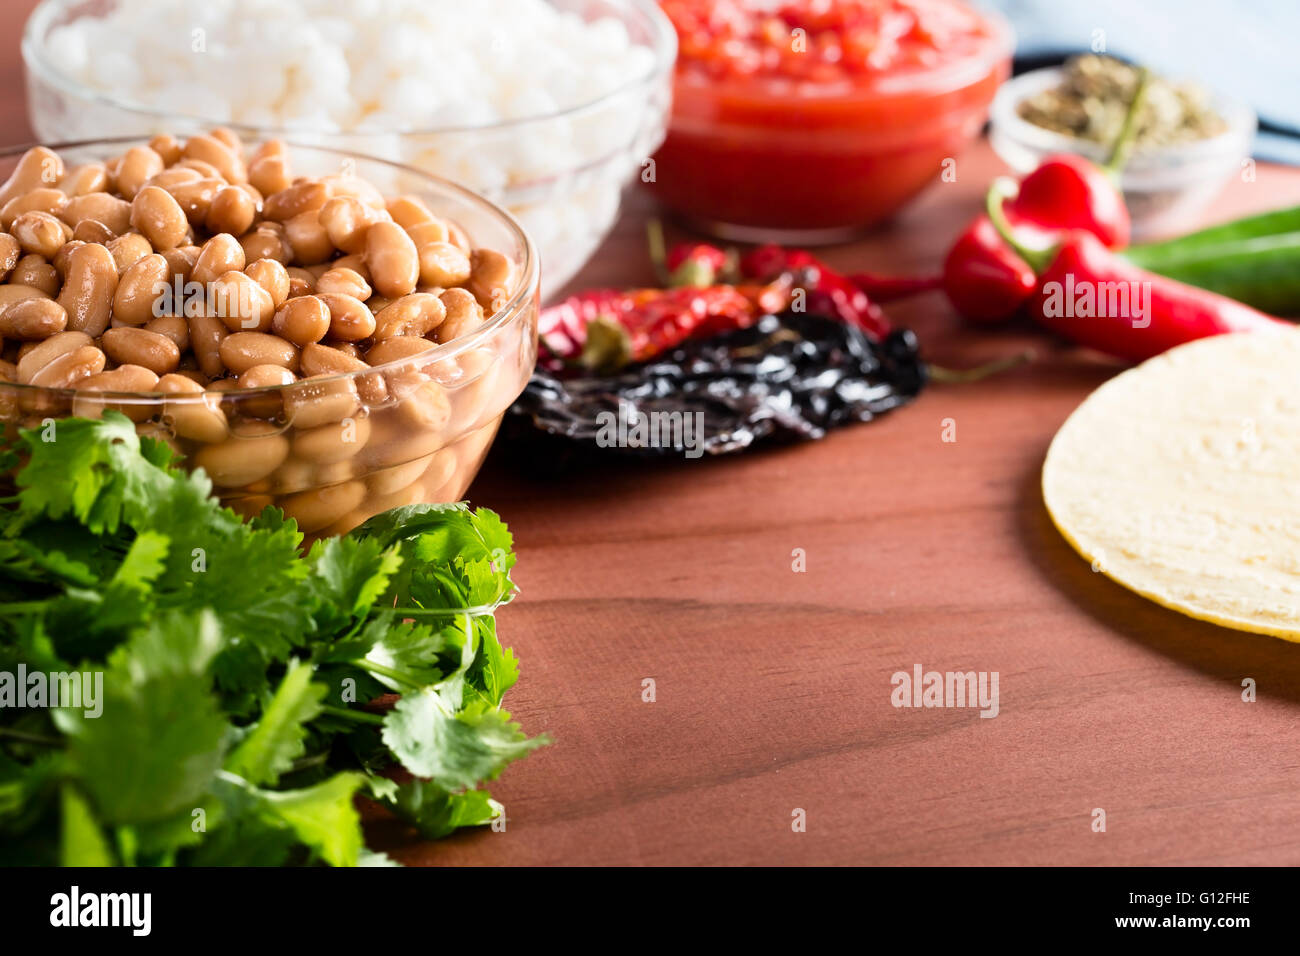 Pinto beans and other ingredients for Mexican cooking. Stock Photo